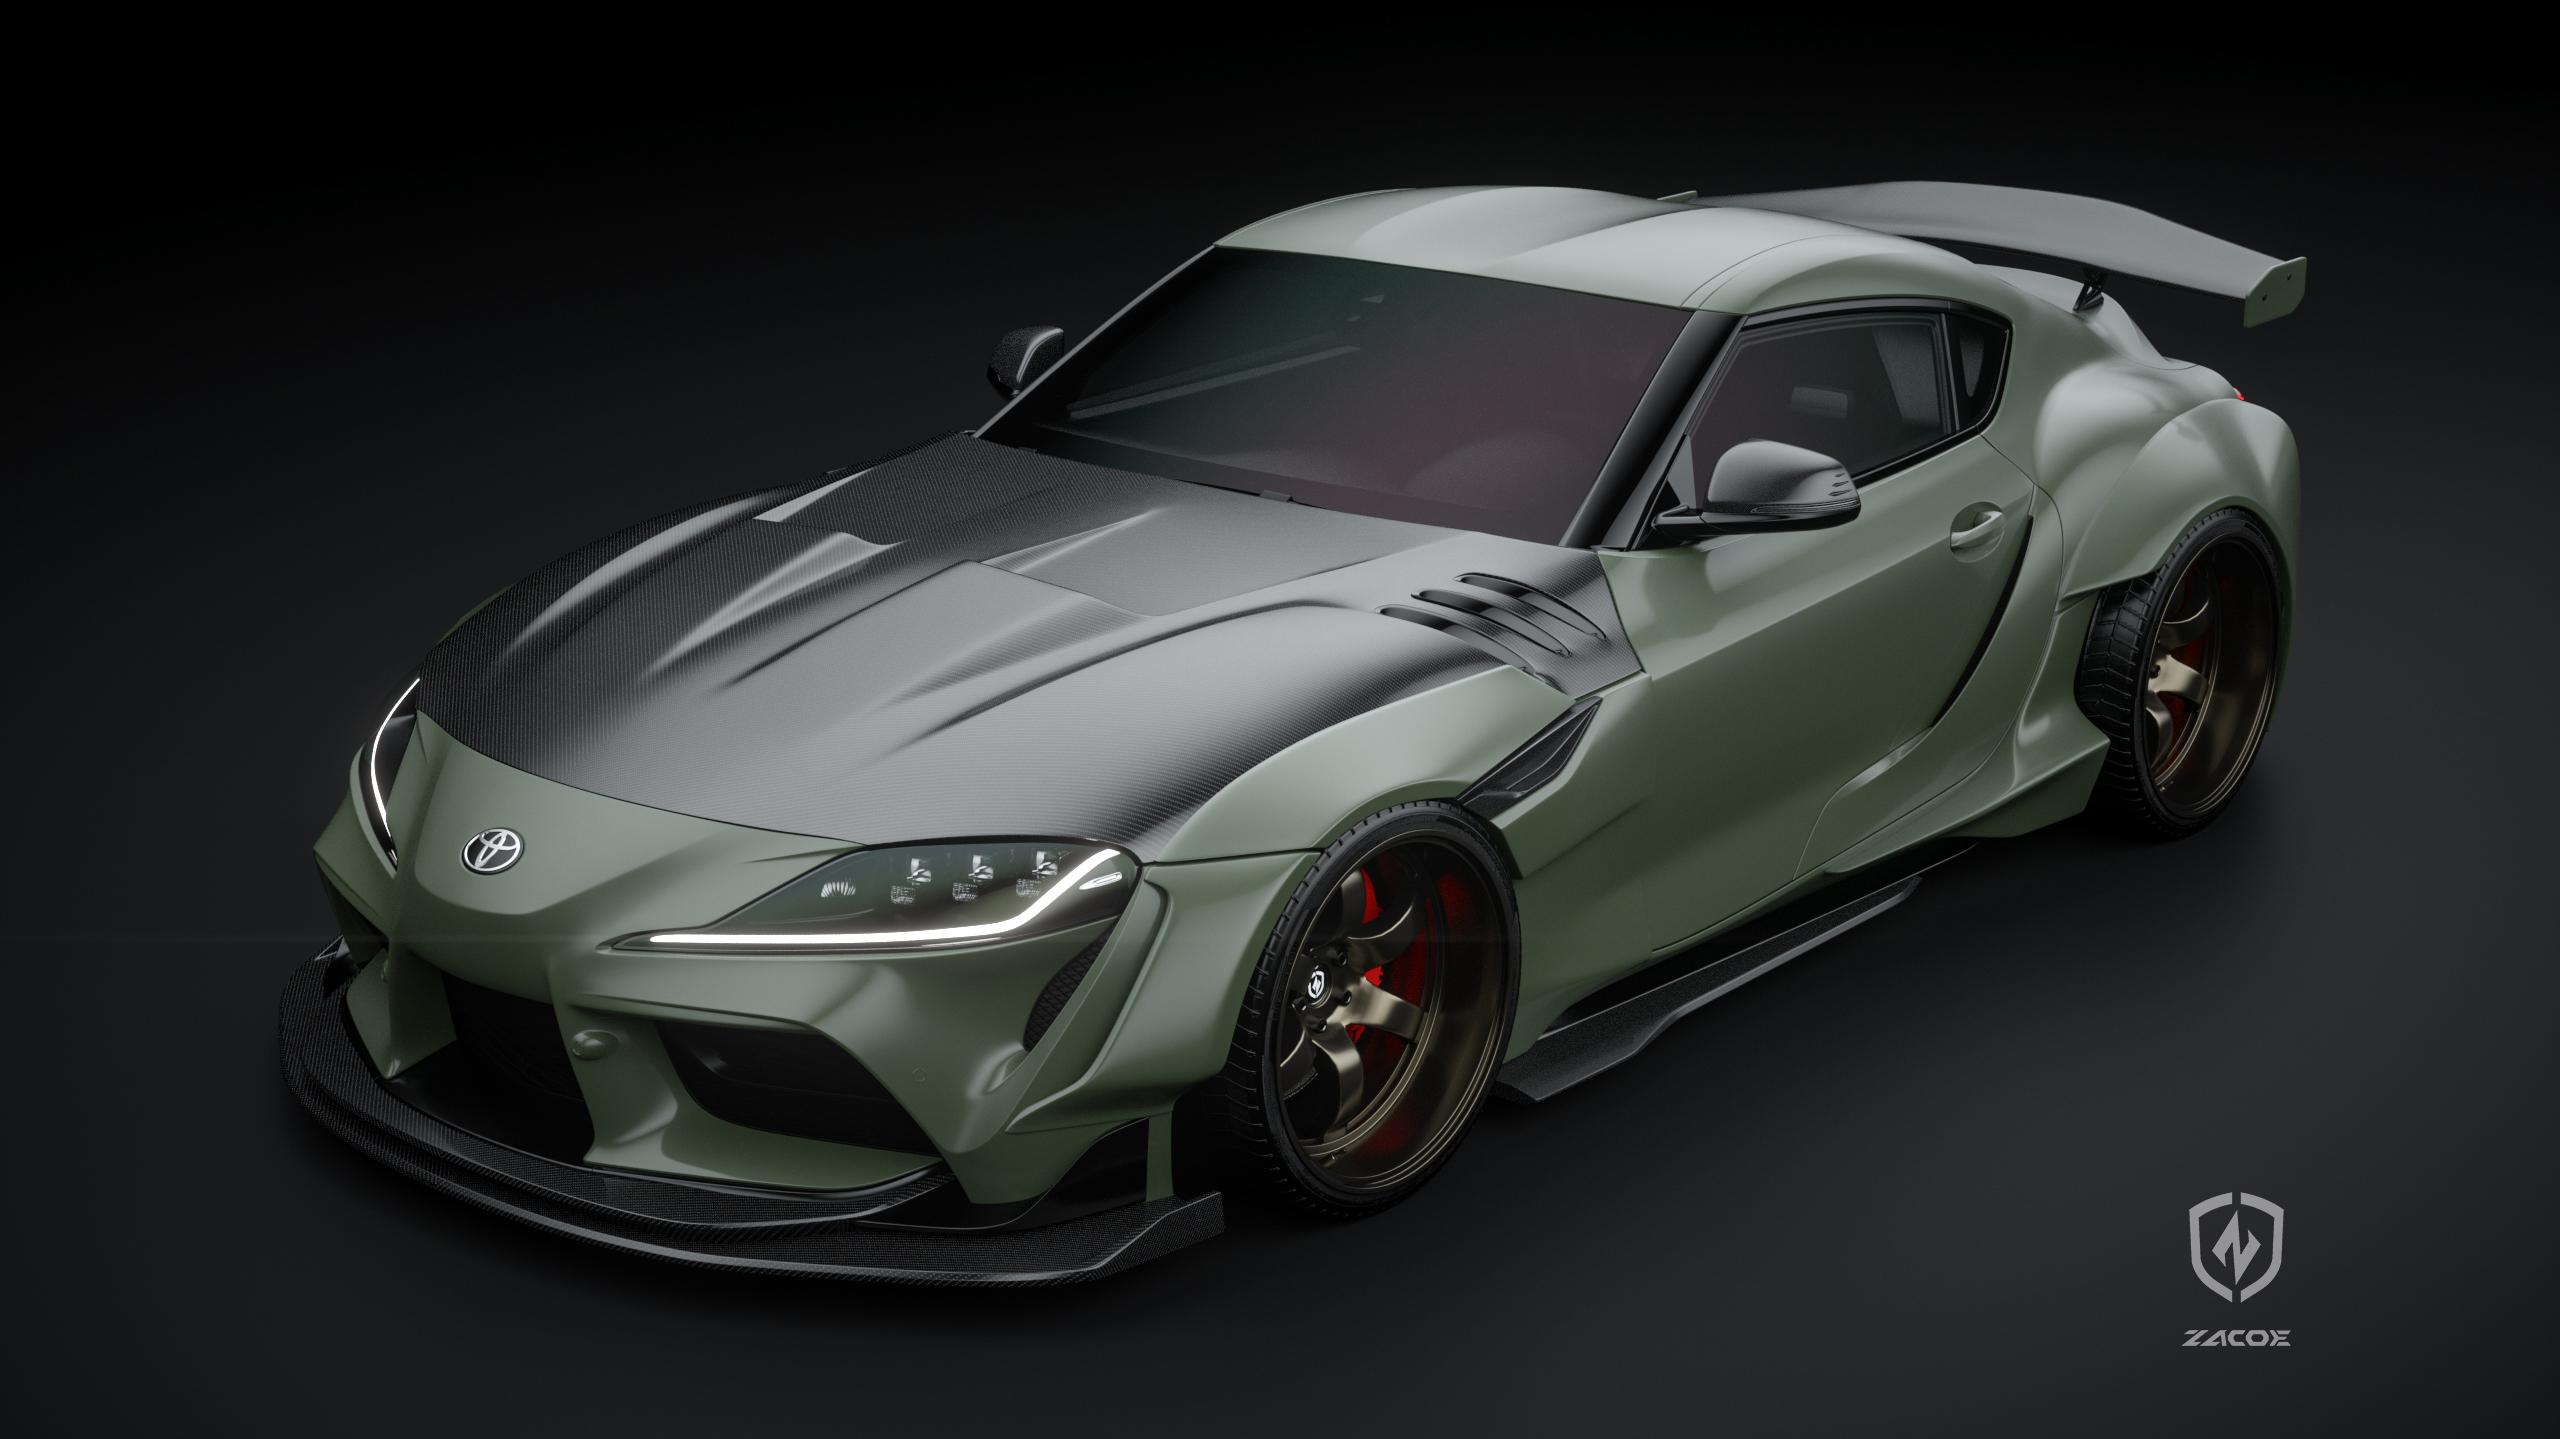 A tuner has given the Toyota Supra a widebody kit Top Gear